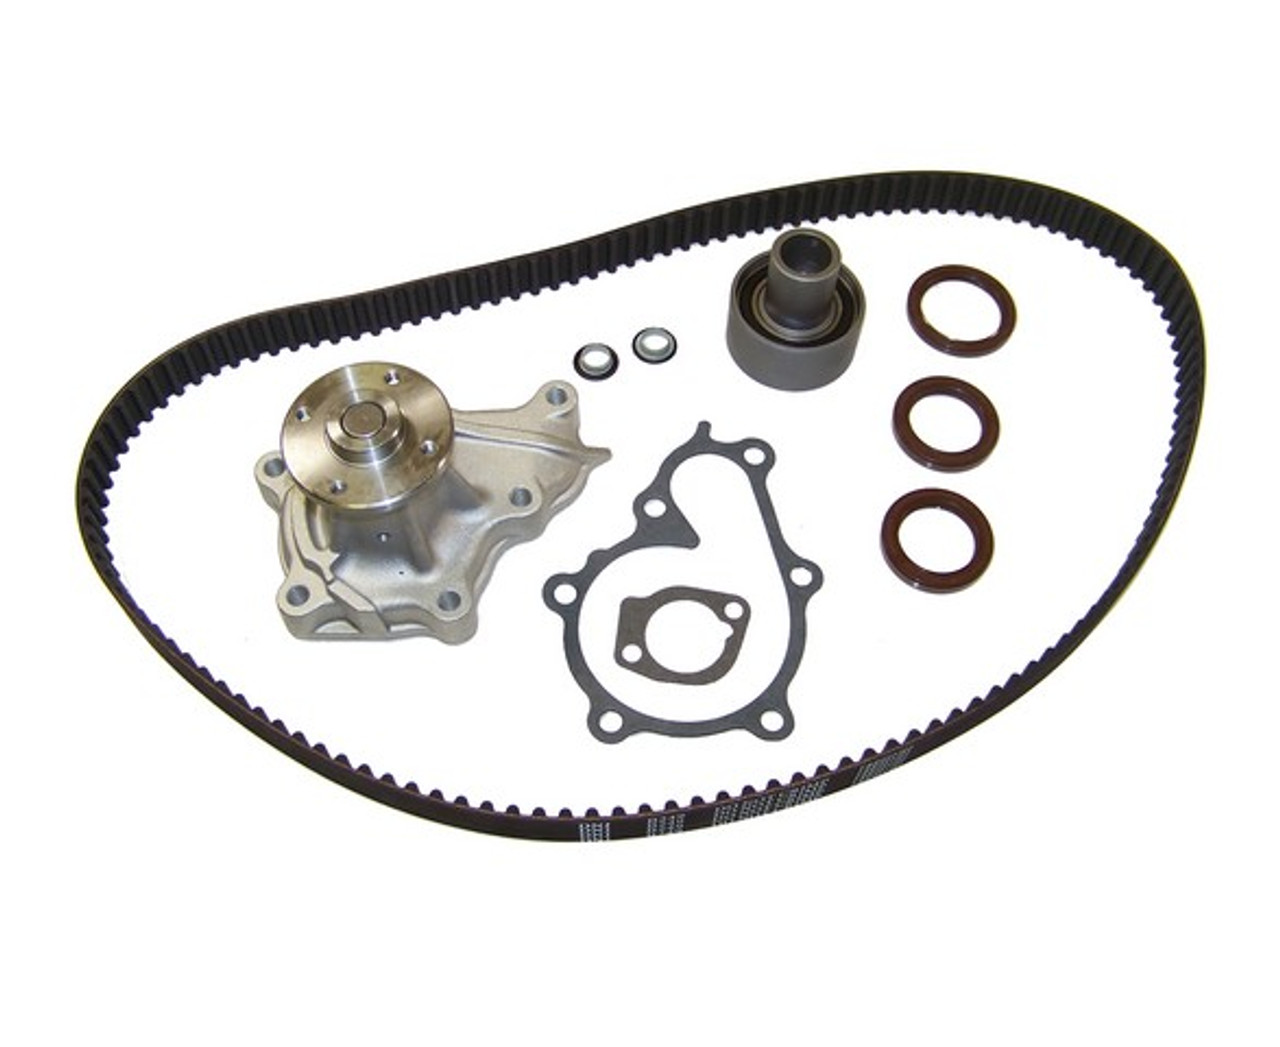 Timing Belt Kit with Water Pump 3.3L 2002 Mercury Villager - TBK634BWP.4